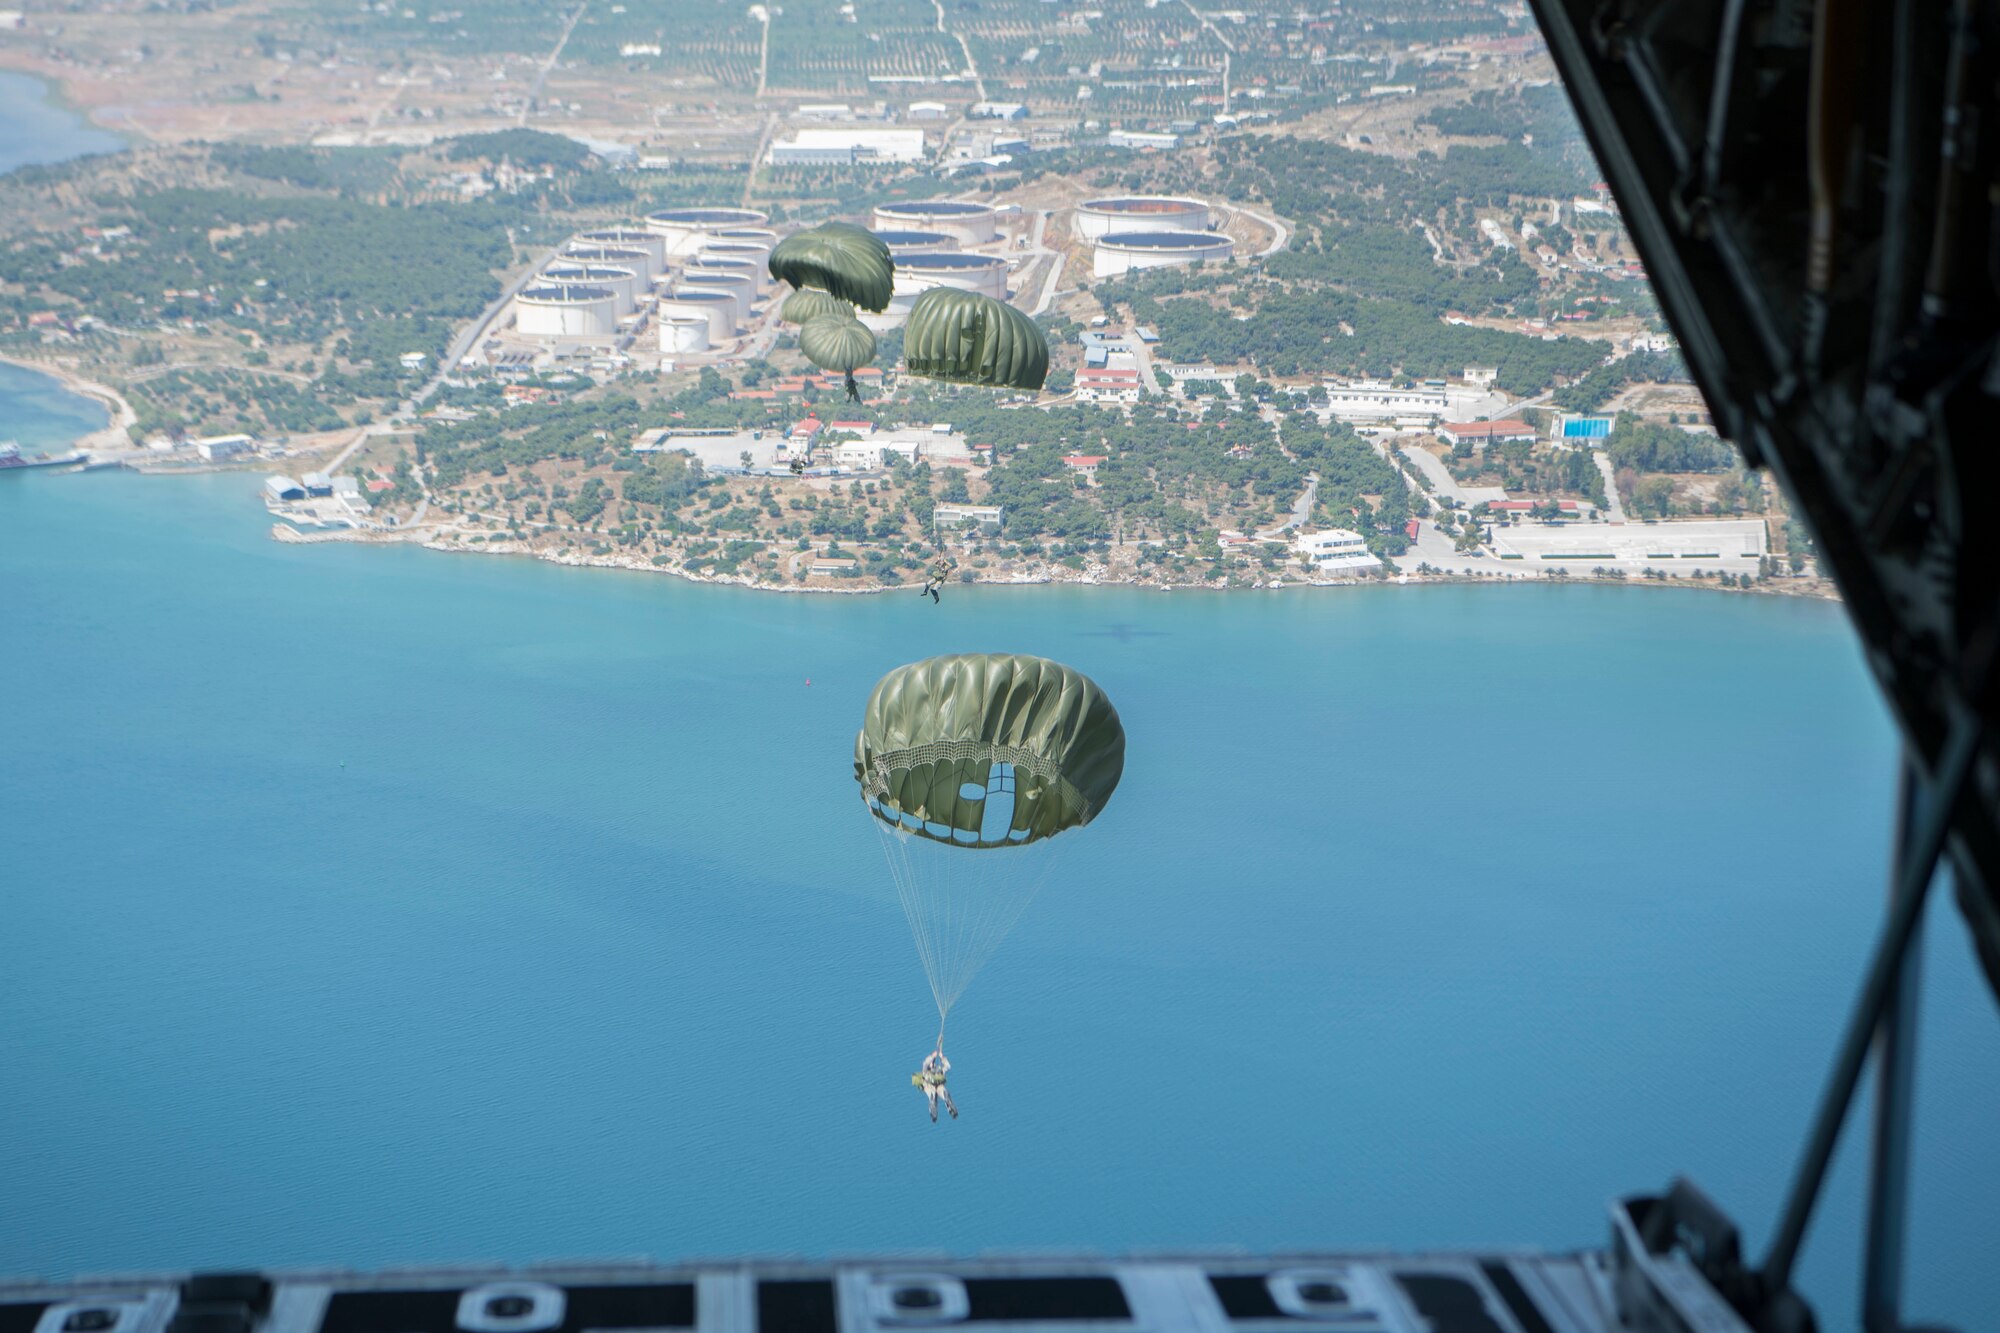 Hellenic paratroopers jump out of a U.S. Air Force C-130J Super Hercules during an exercise Stolen Cerberus V training mission in the skies near Elefsis Air Base, Greece, May 9, 2018. A U.S. Army jumpmaster verified all paratroopers parachutes were within U.S. restrictios prior to boarding and jumping from the aircraft. Combined exercises such as these enhance the interoperability capabilities and skills among allied and partner armed forces. (U.S. Air Force photo by Senior Airman Devin M. Rumbaugh)